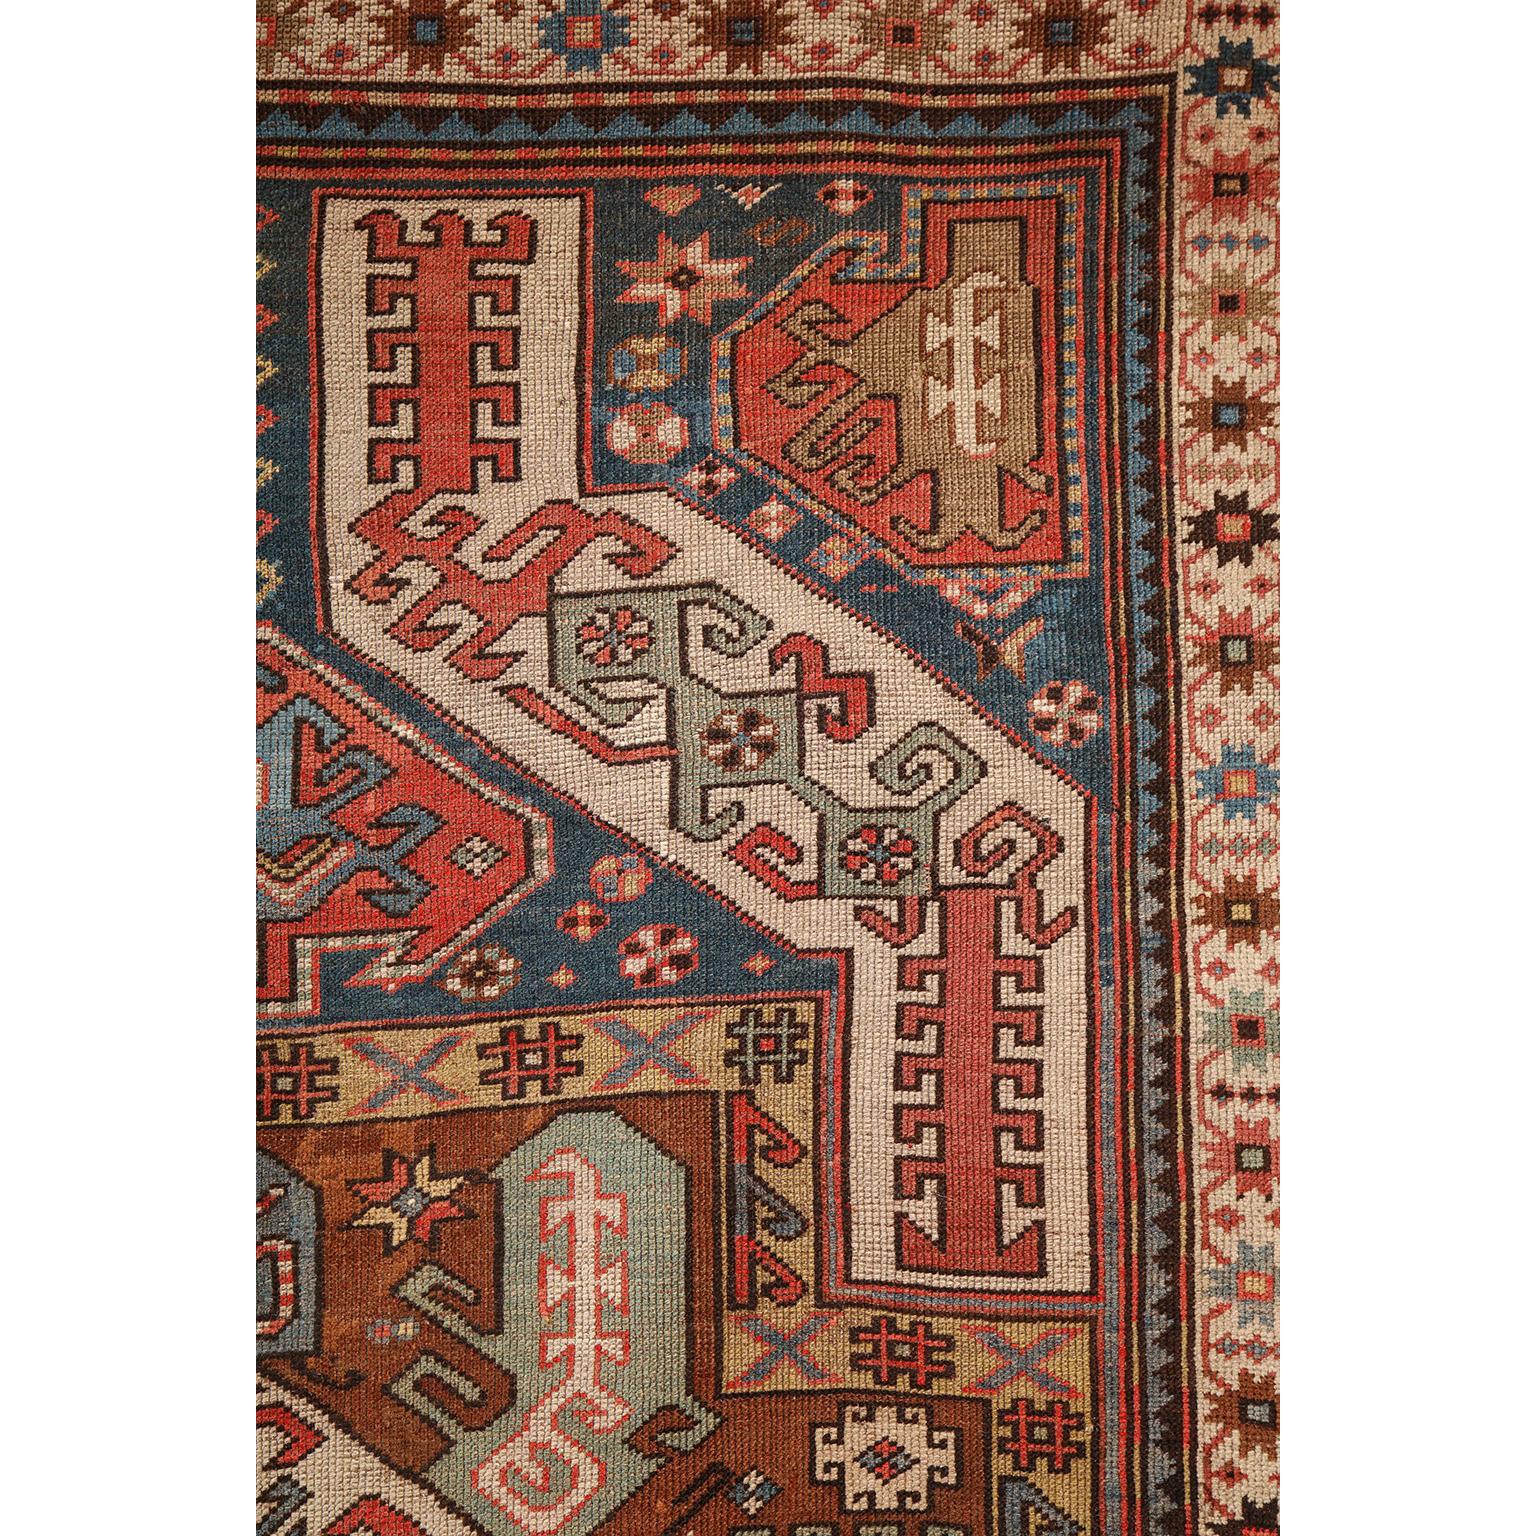 Antique 1880s Caucasian Rug, Hand-knotted Wool, Blue, Green, Red, 4' x 6' For Sale 2